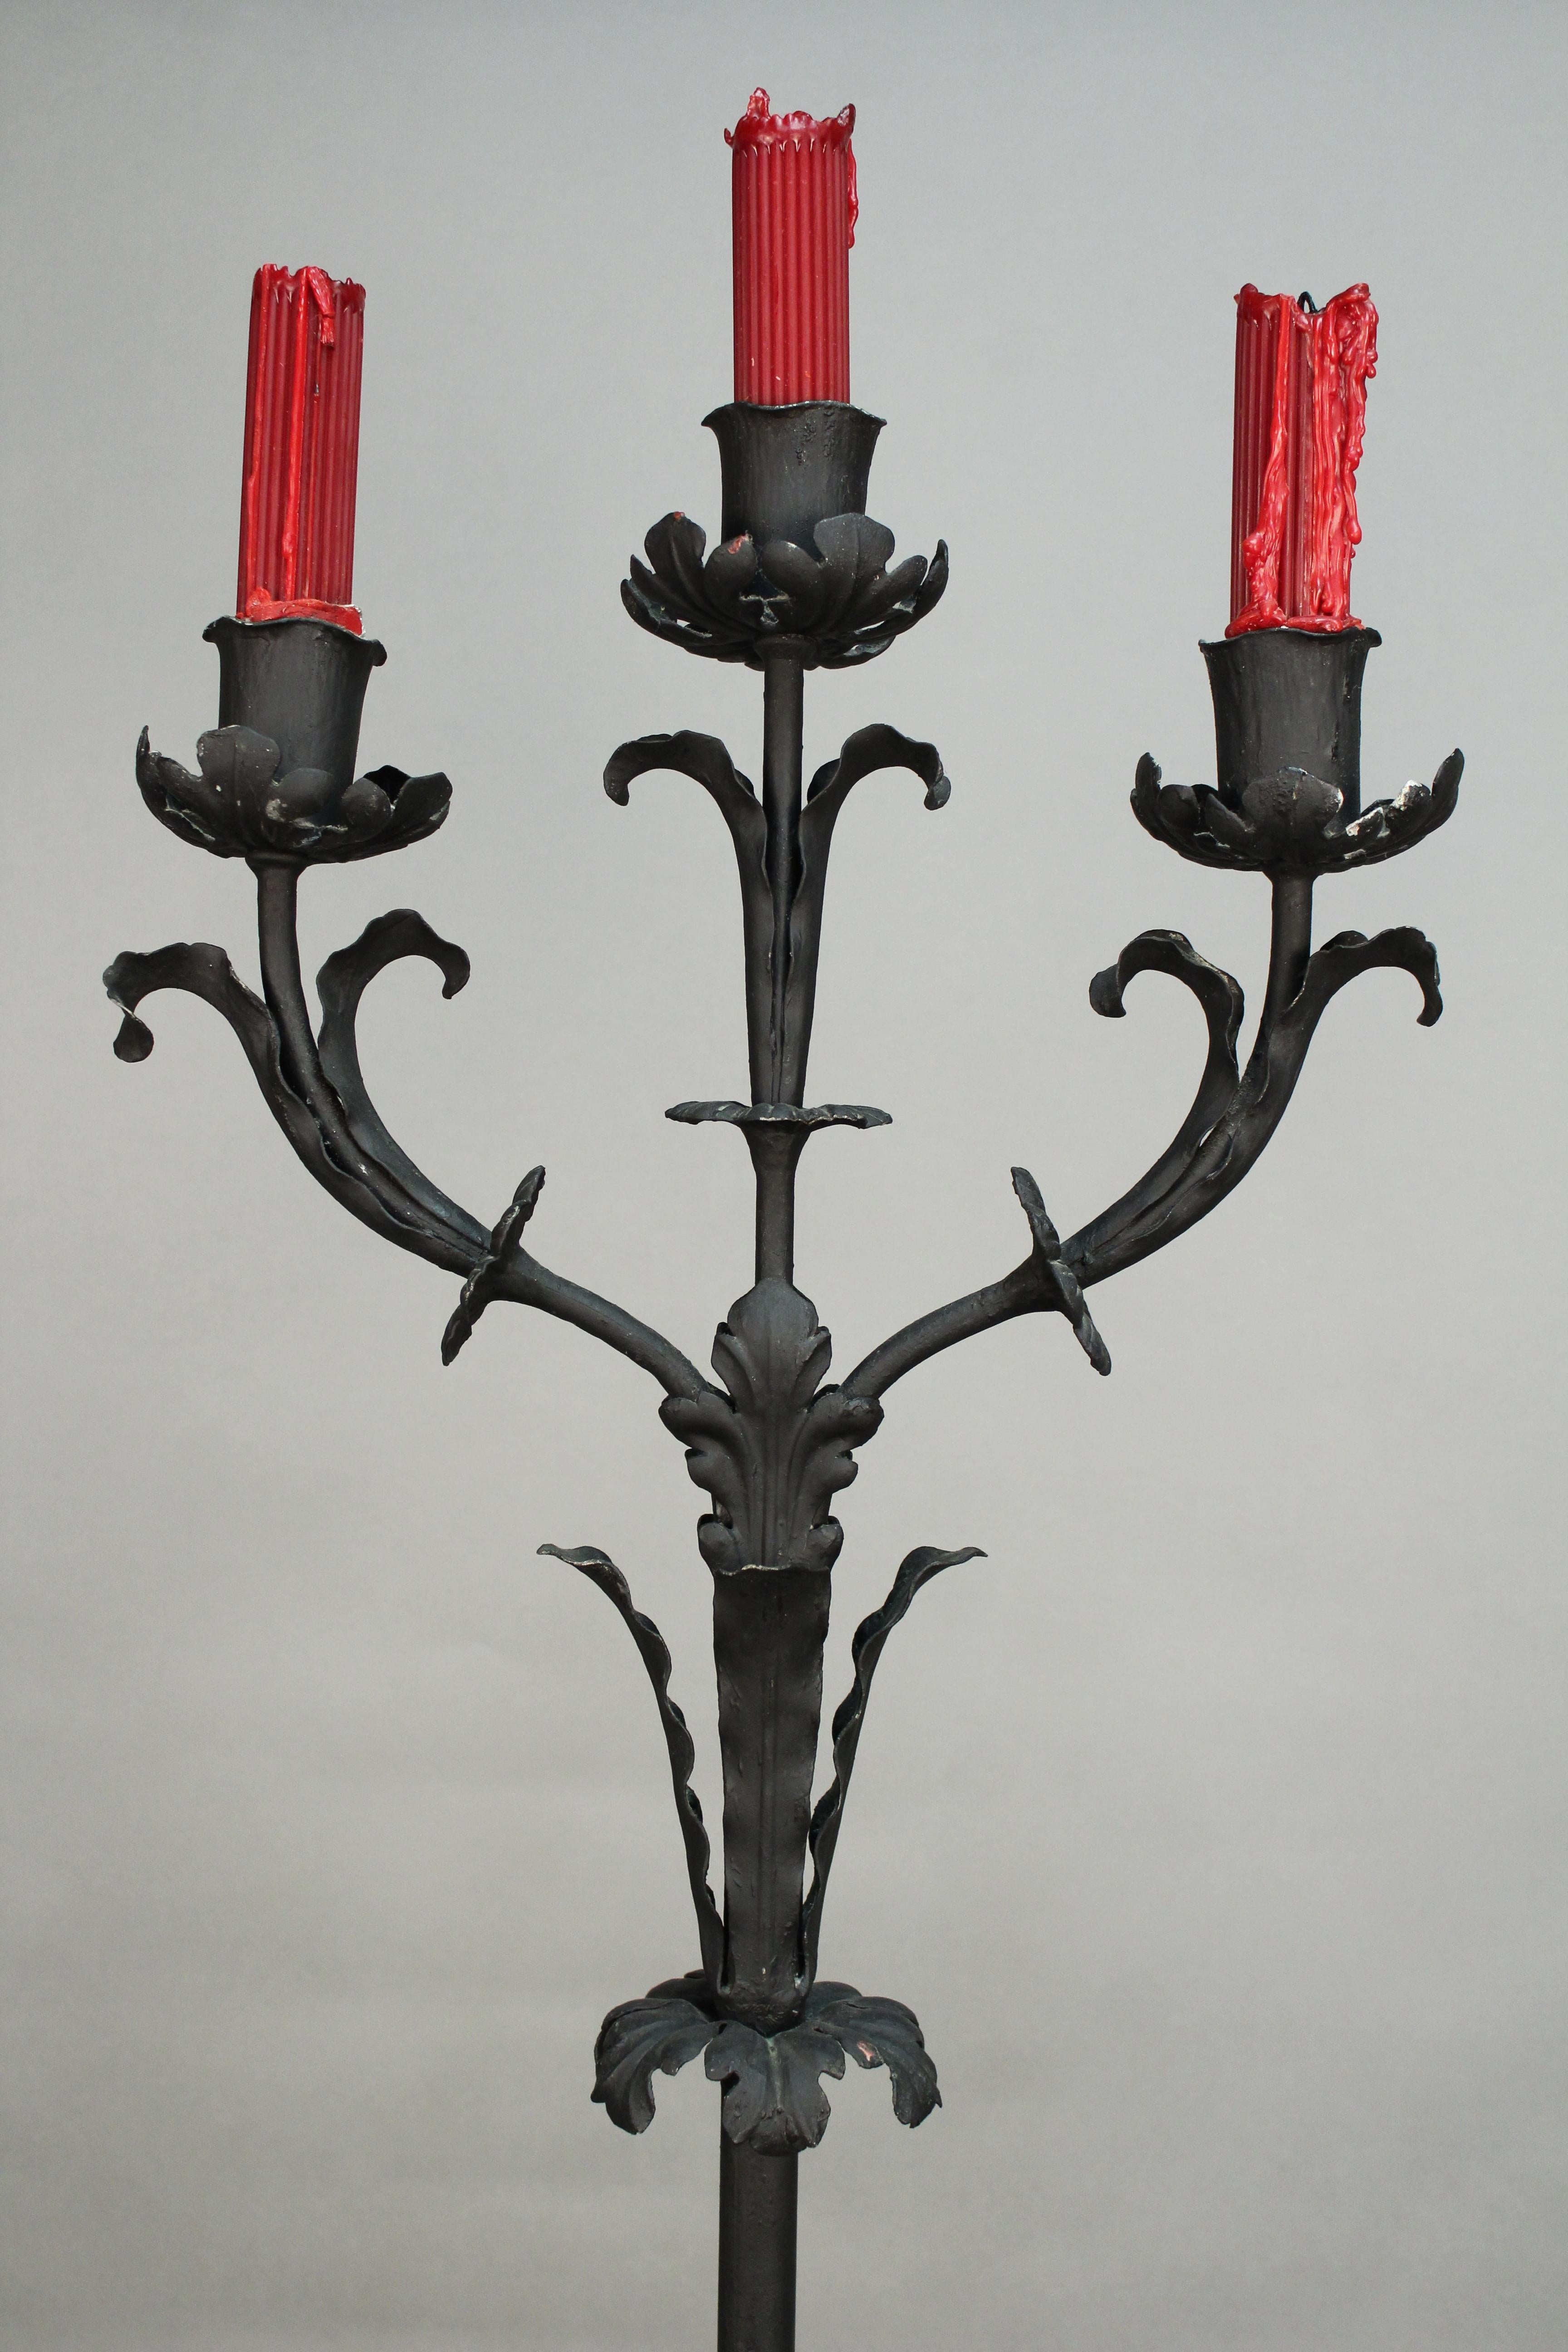 Pair of Tall Wrought Iron Candleholders Fits Nicely with Spanish Revival Tudor (Spanisch Kolonial)